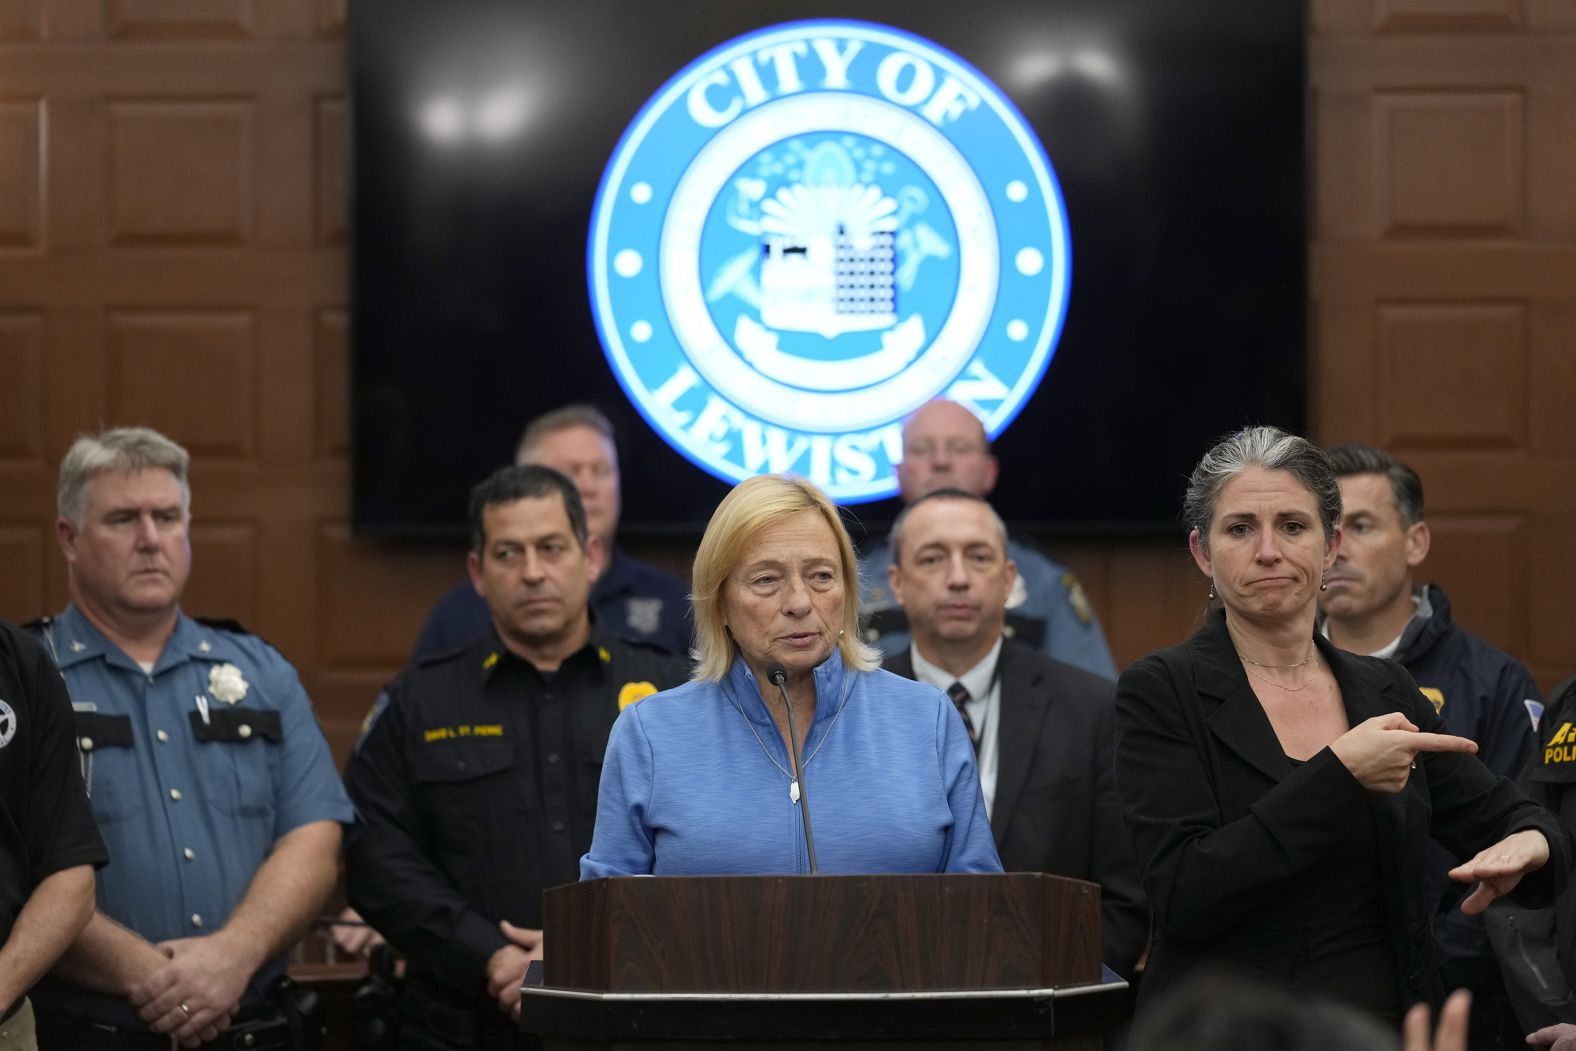 Gov. Janet Mills speaks during a news conference Friday in which authorities announce that Robert Card, the suspect in Wednesday's shootings in Lewiston, was found dead.